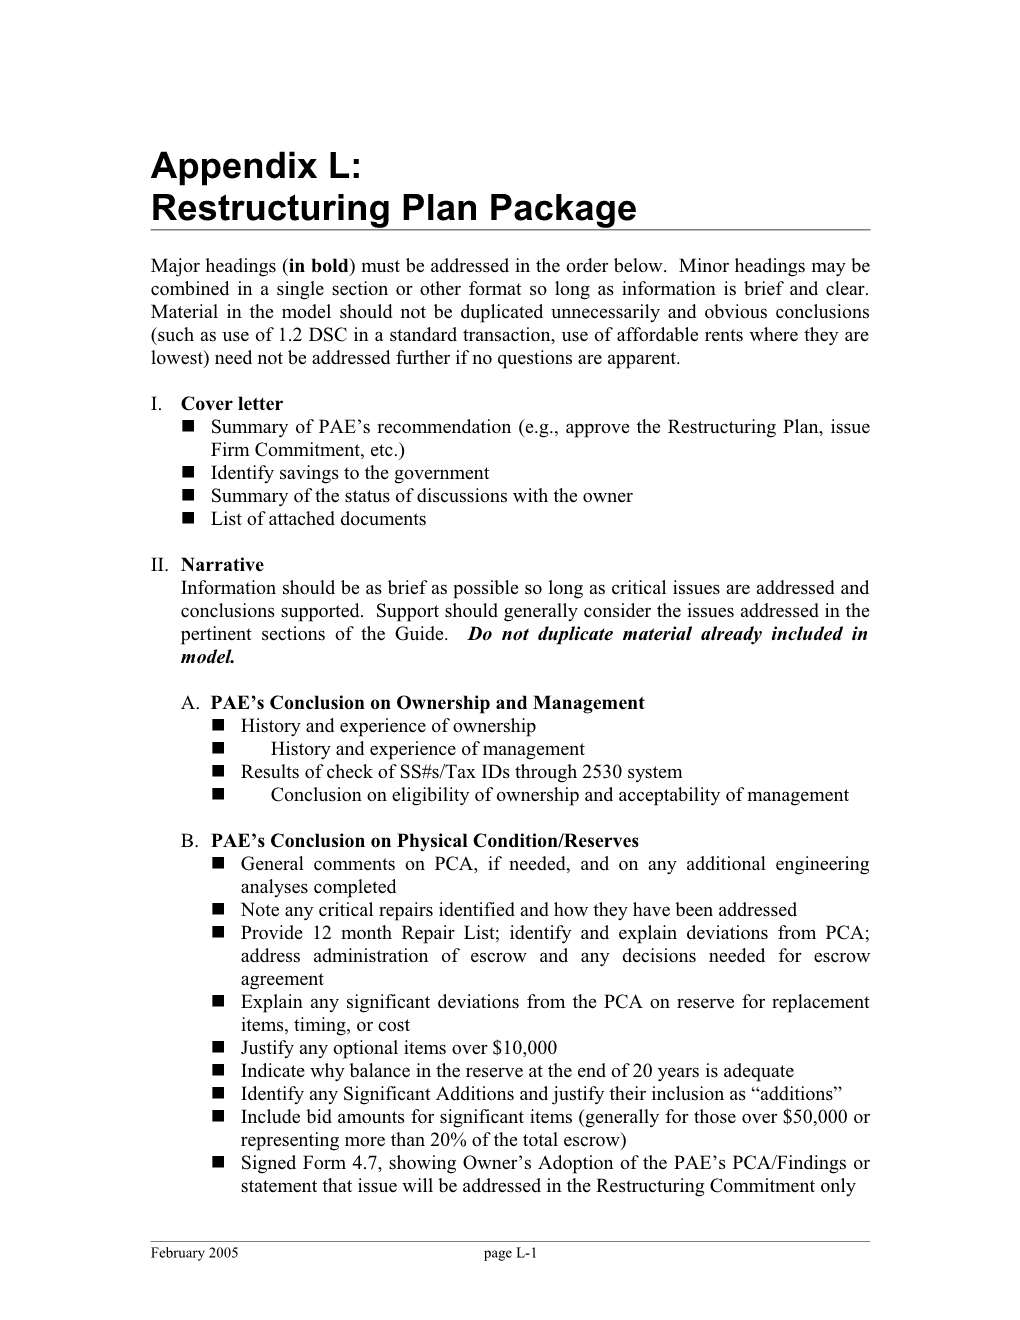 Restructuring Plan Package